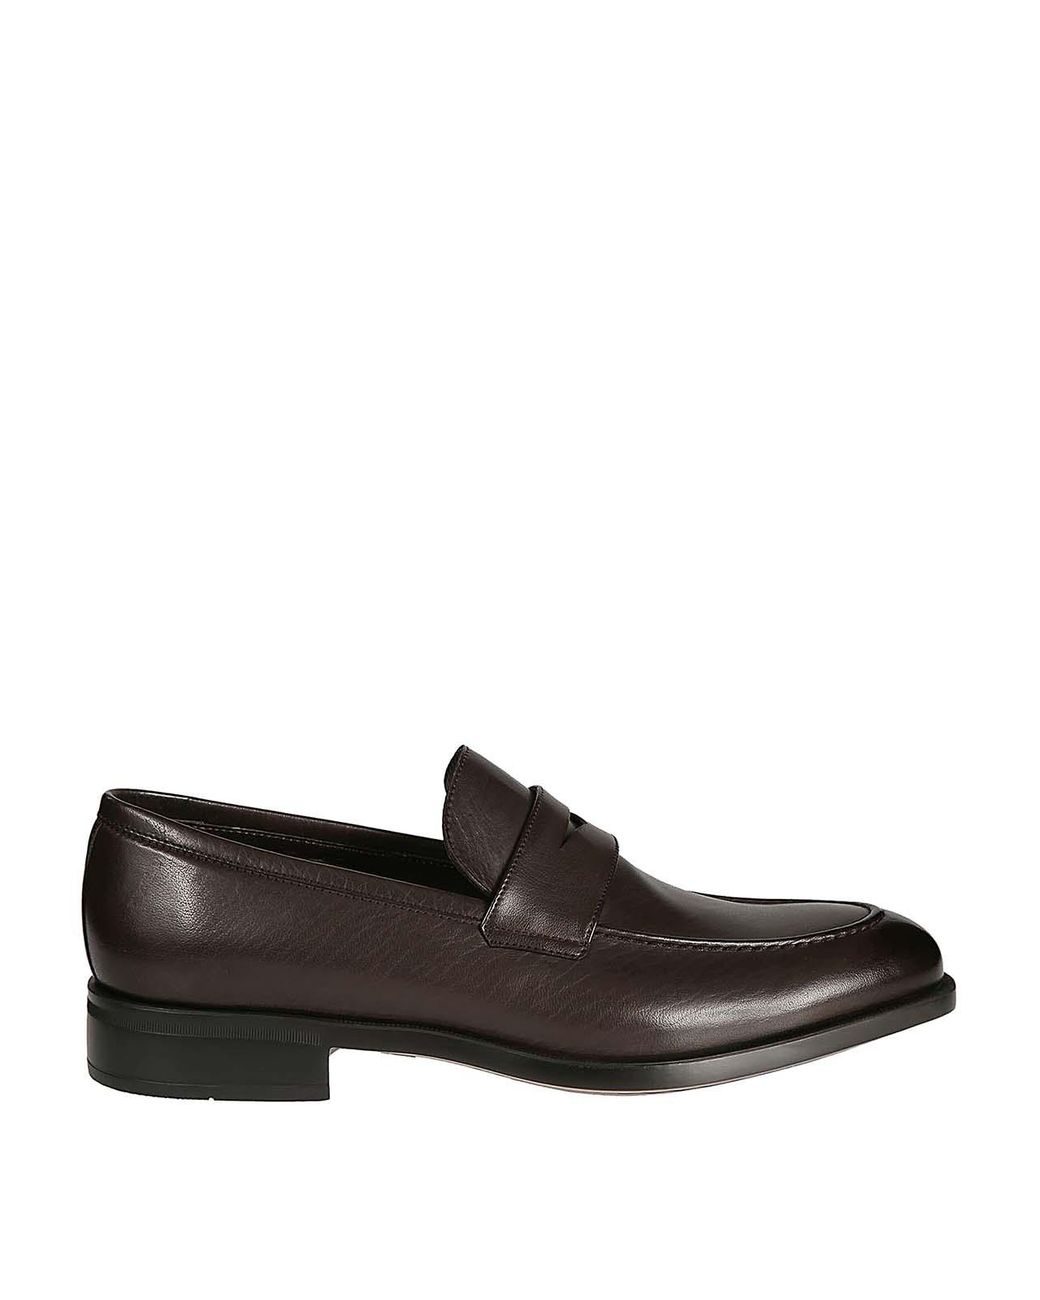 Moreschi Brown Leather Loafers for Men - Save 20% - Lyst